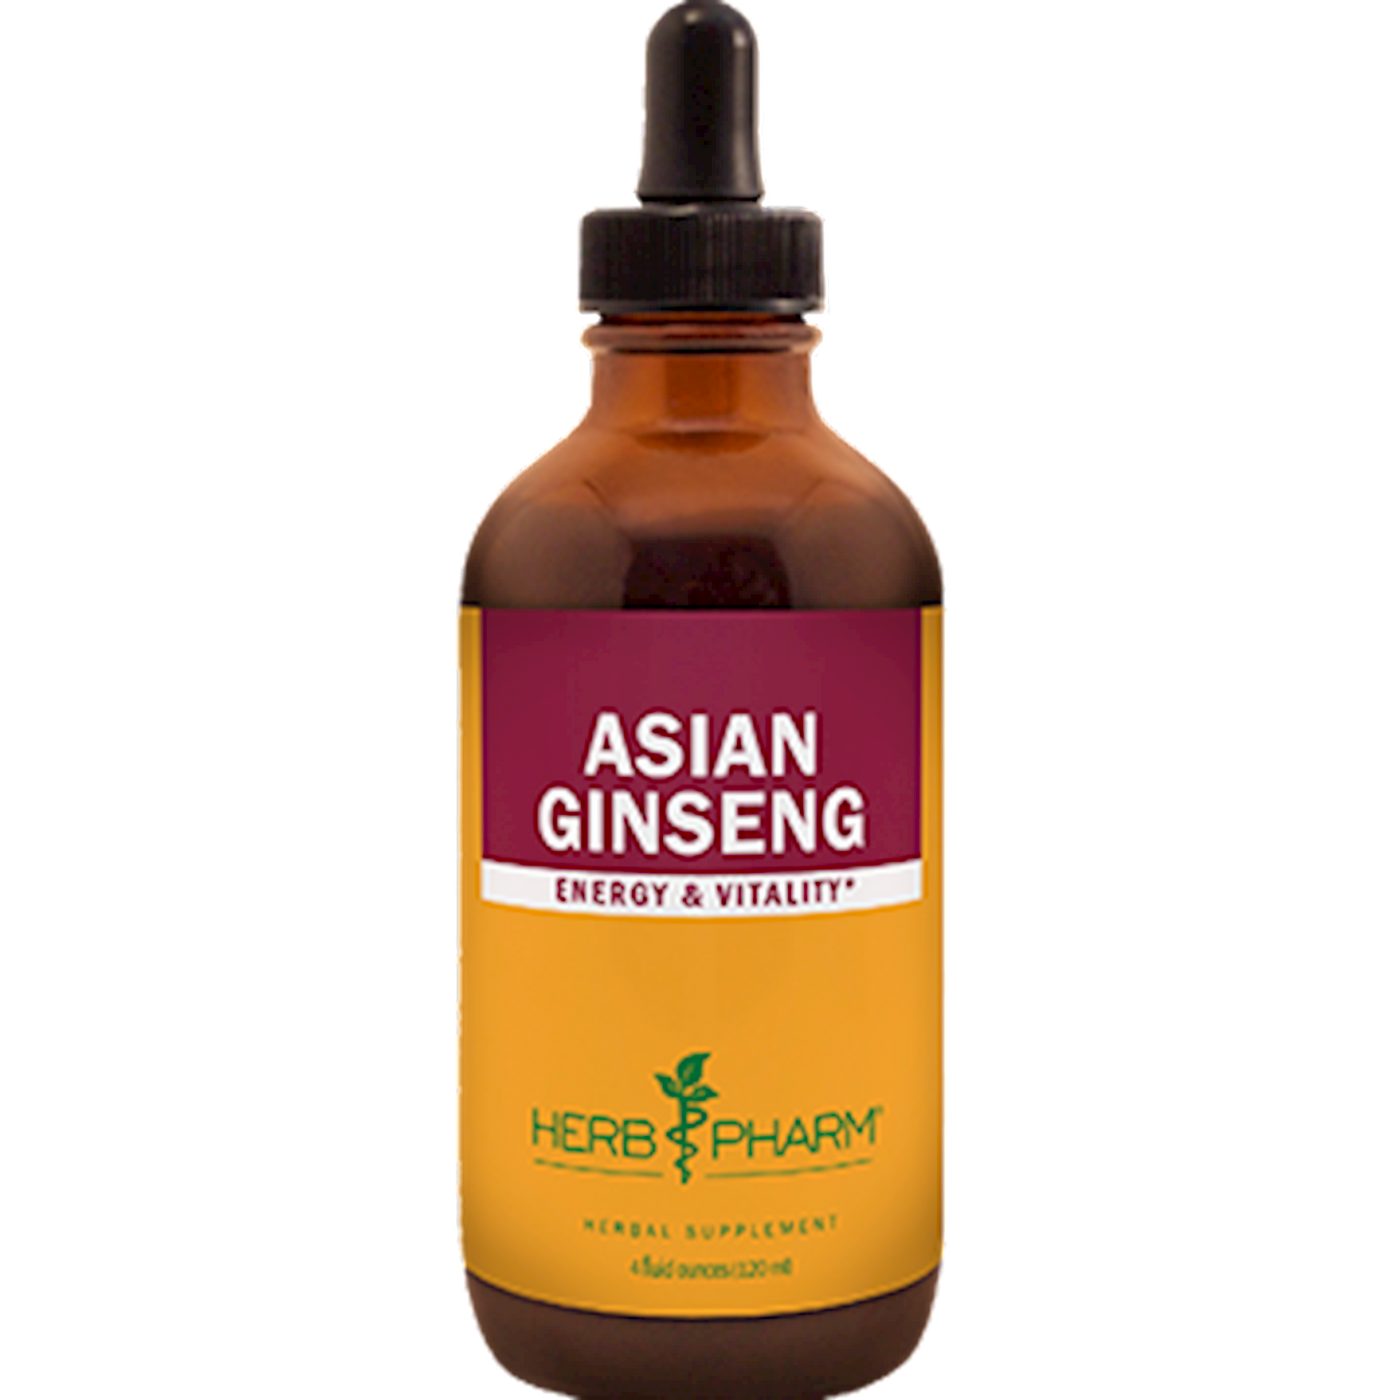 Asian Ginseng  Curated Wellness